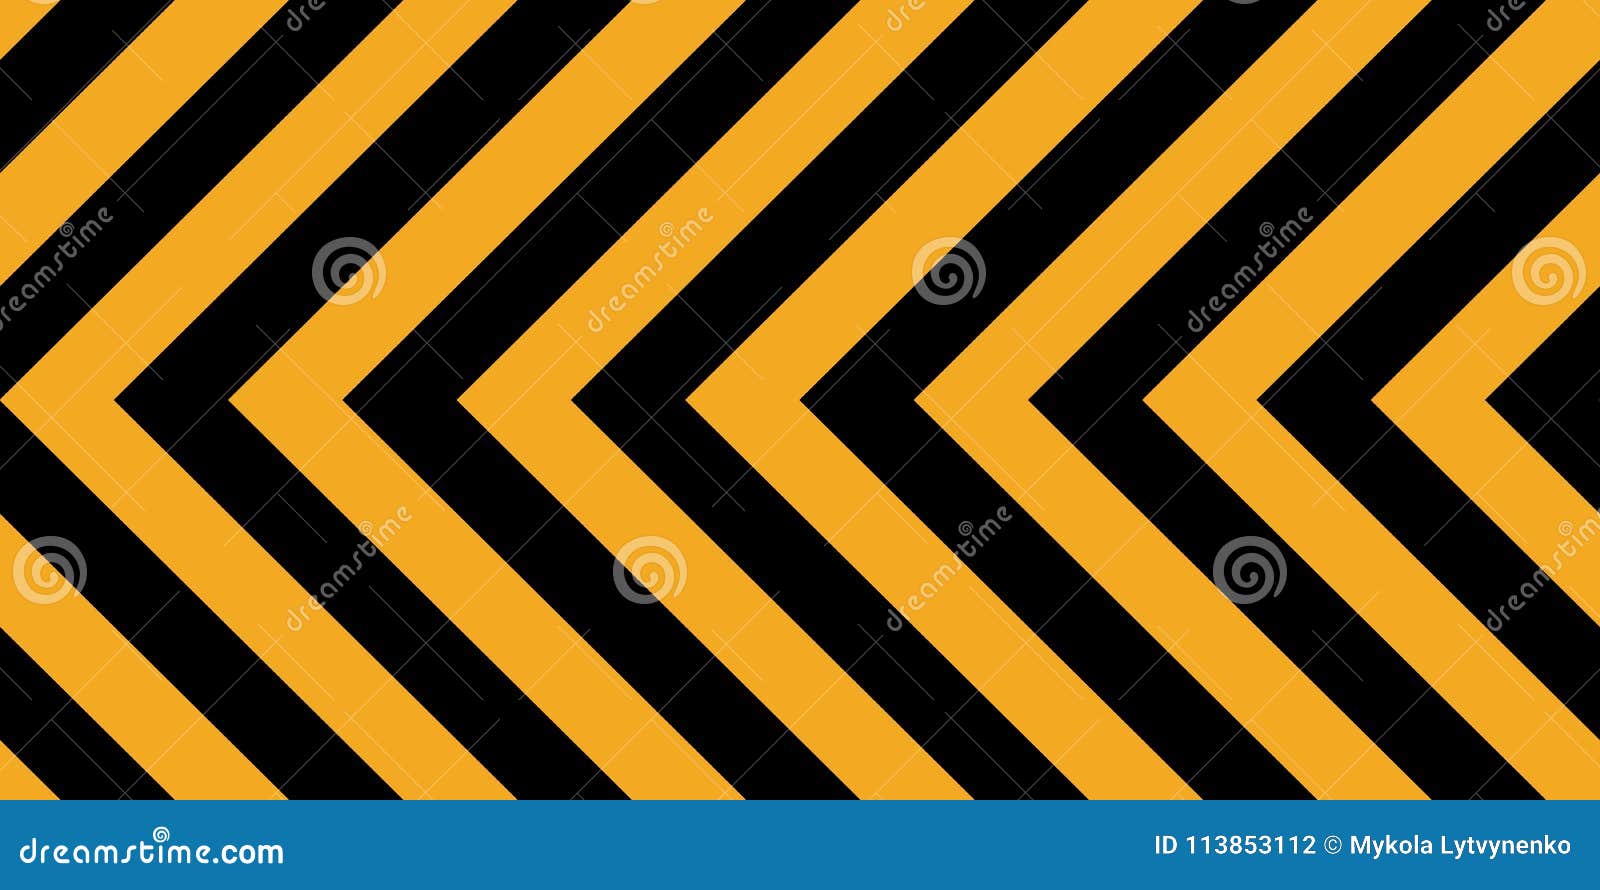 background yellow black stripes, industrial sign safety stripe warning,  background warn caution construction